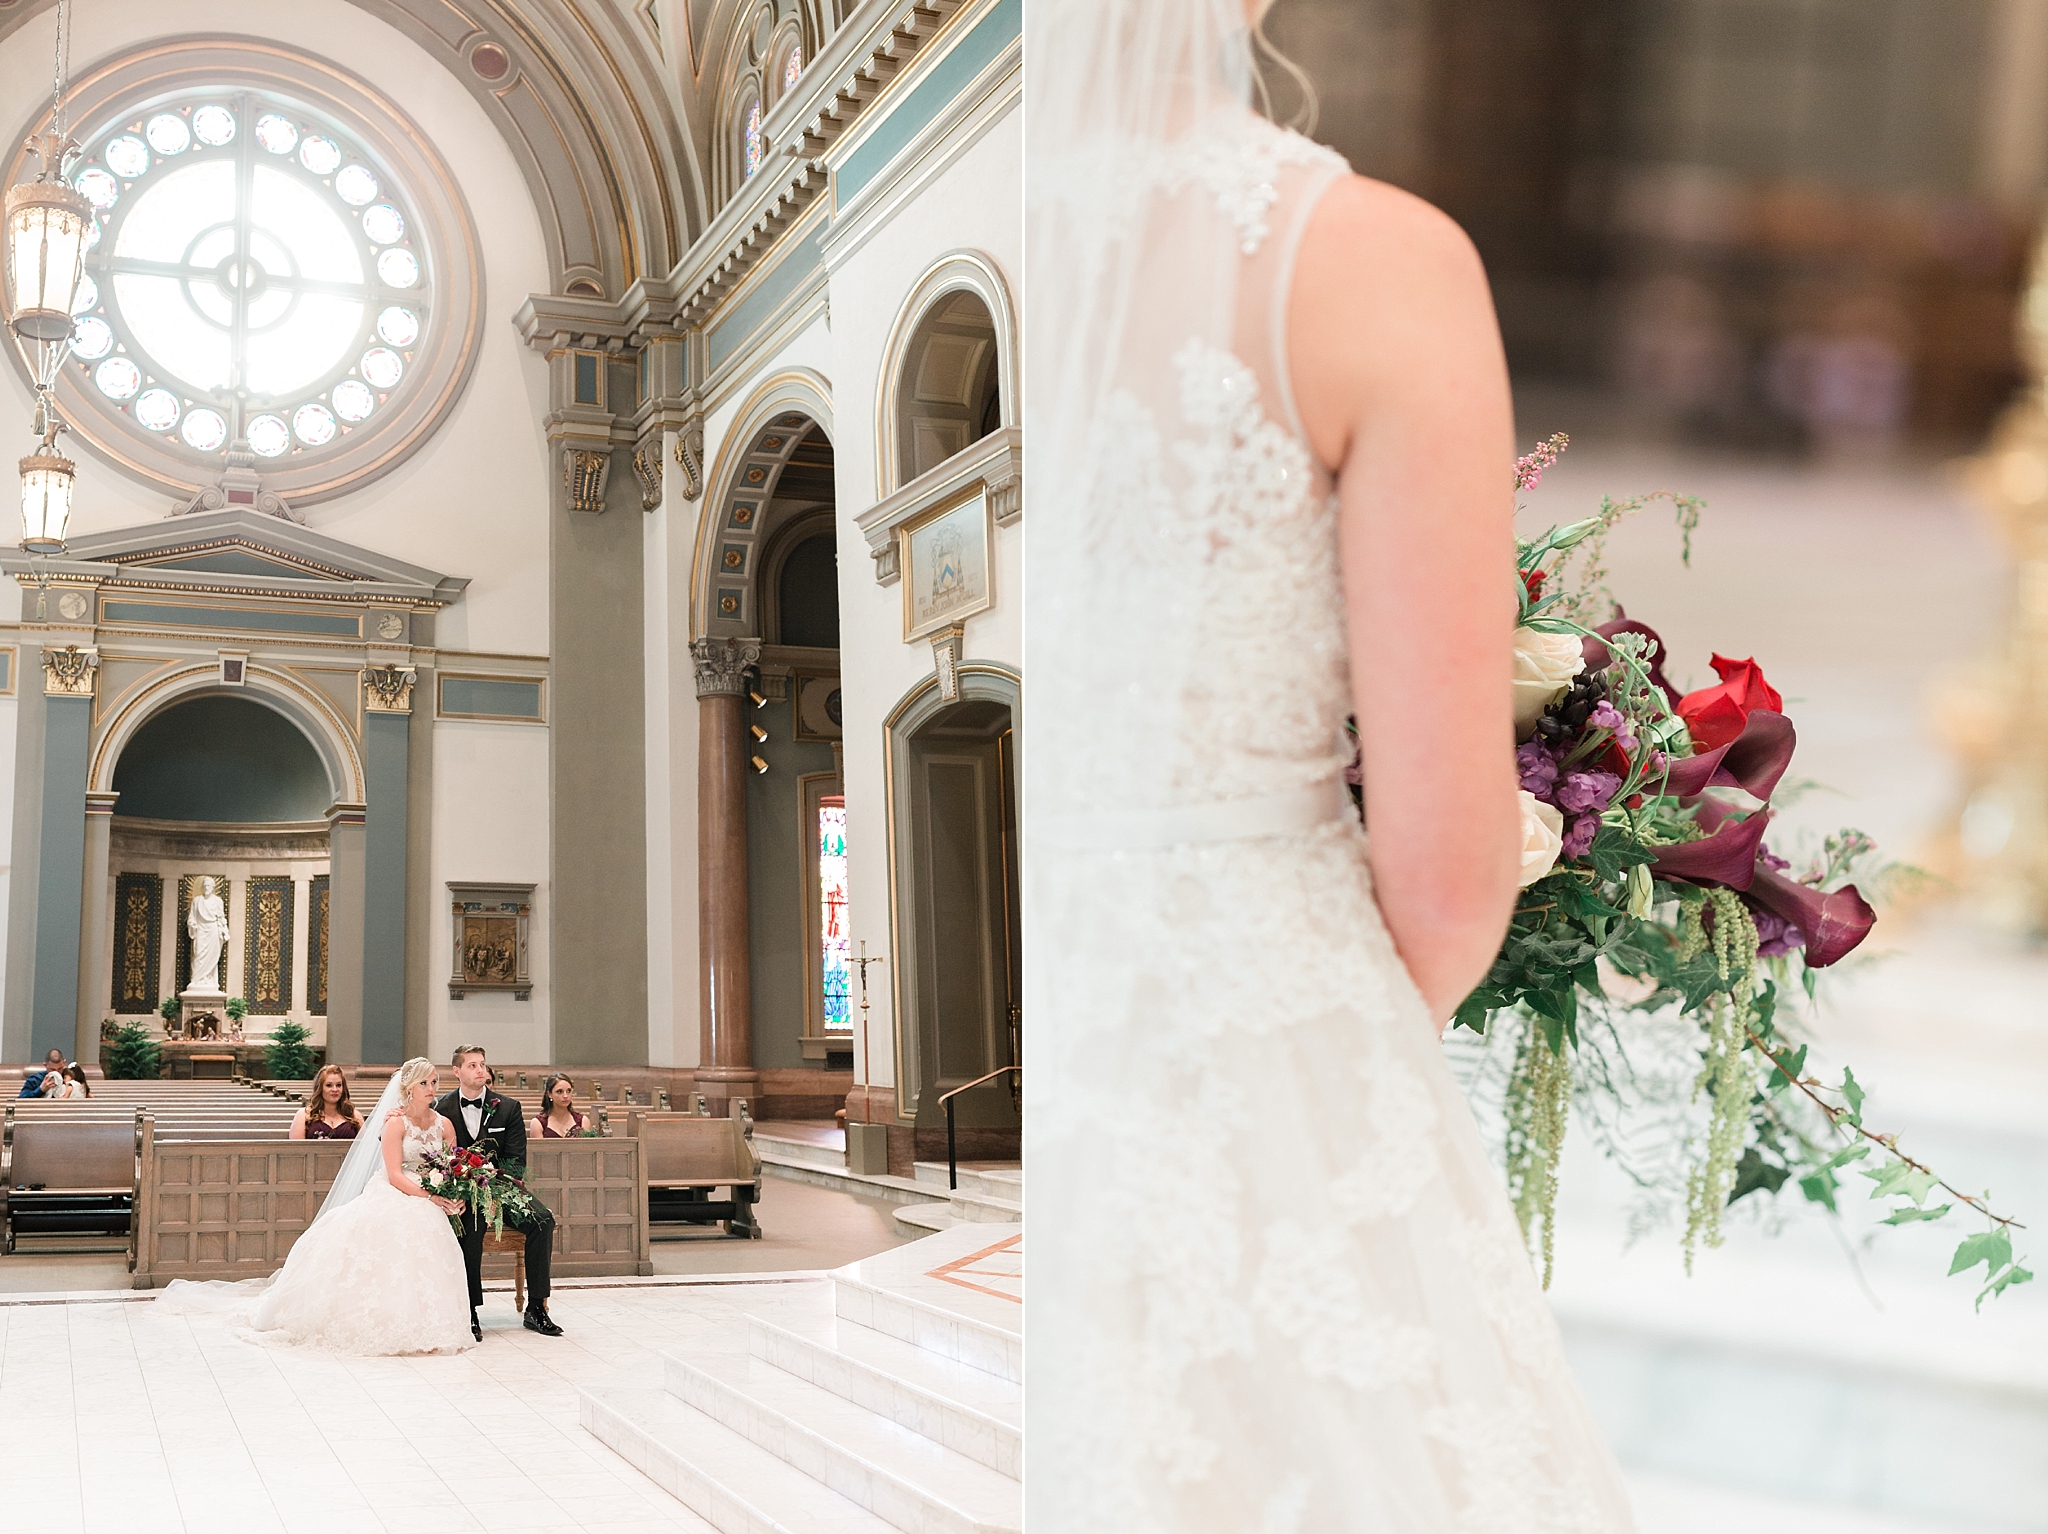 Alicia, a Washington, DC wedding photographer, captures this stunning black-tie wedding at the Cathedral of the Sacred Heart and Omni Hotel in Richmond, VA.